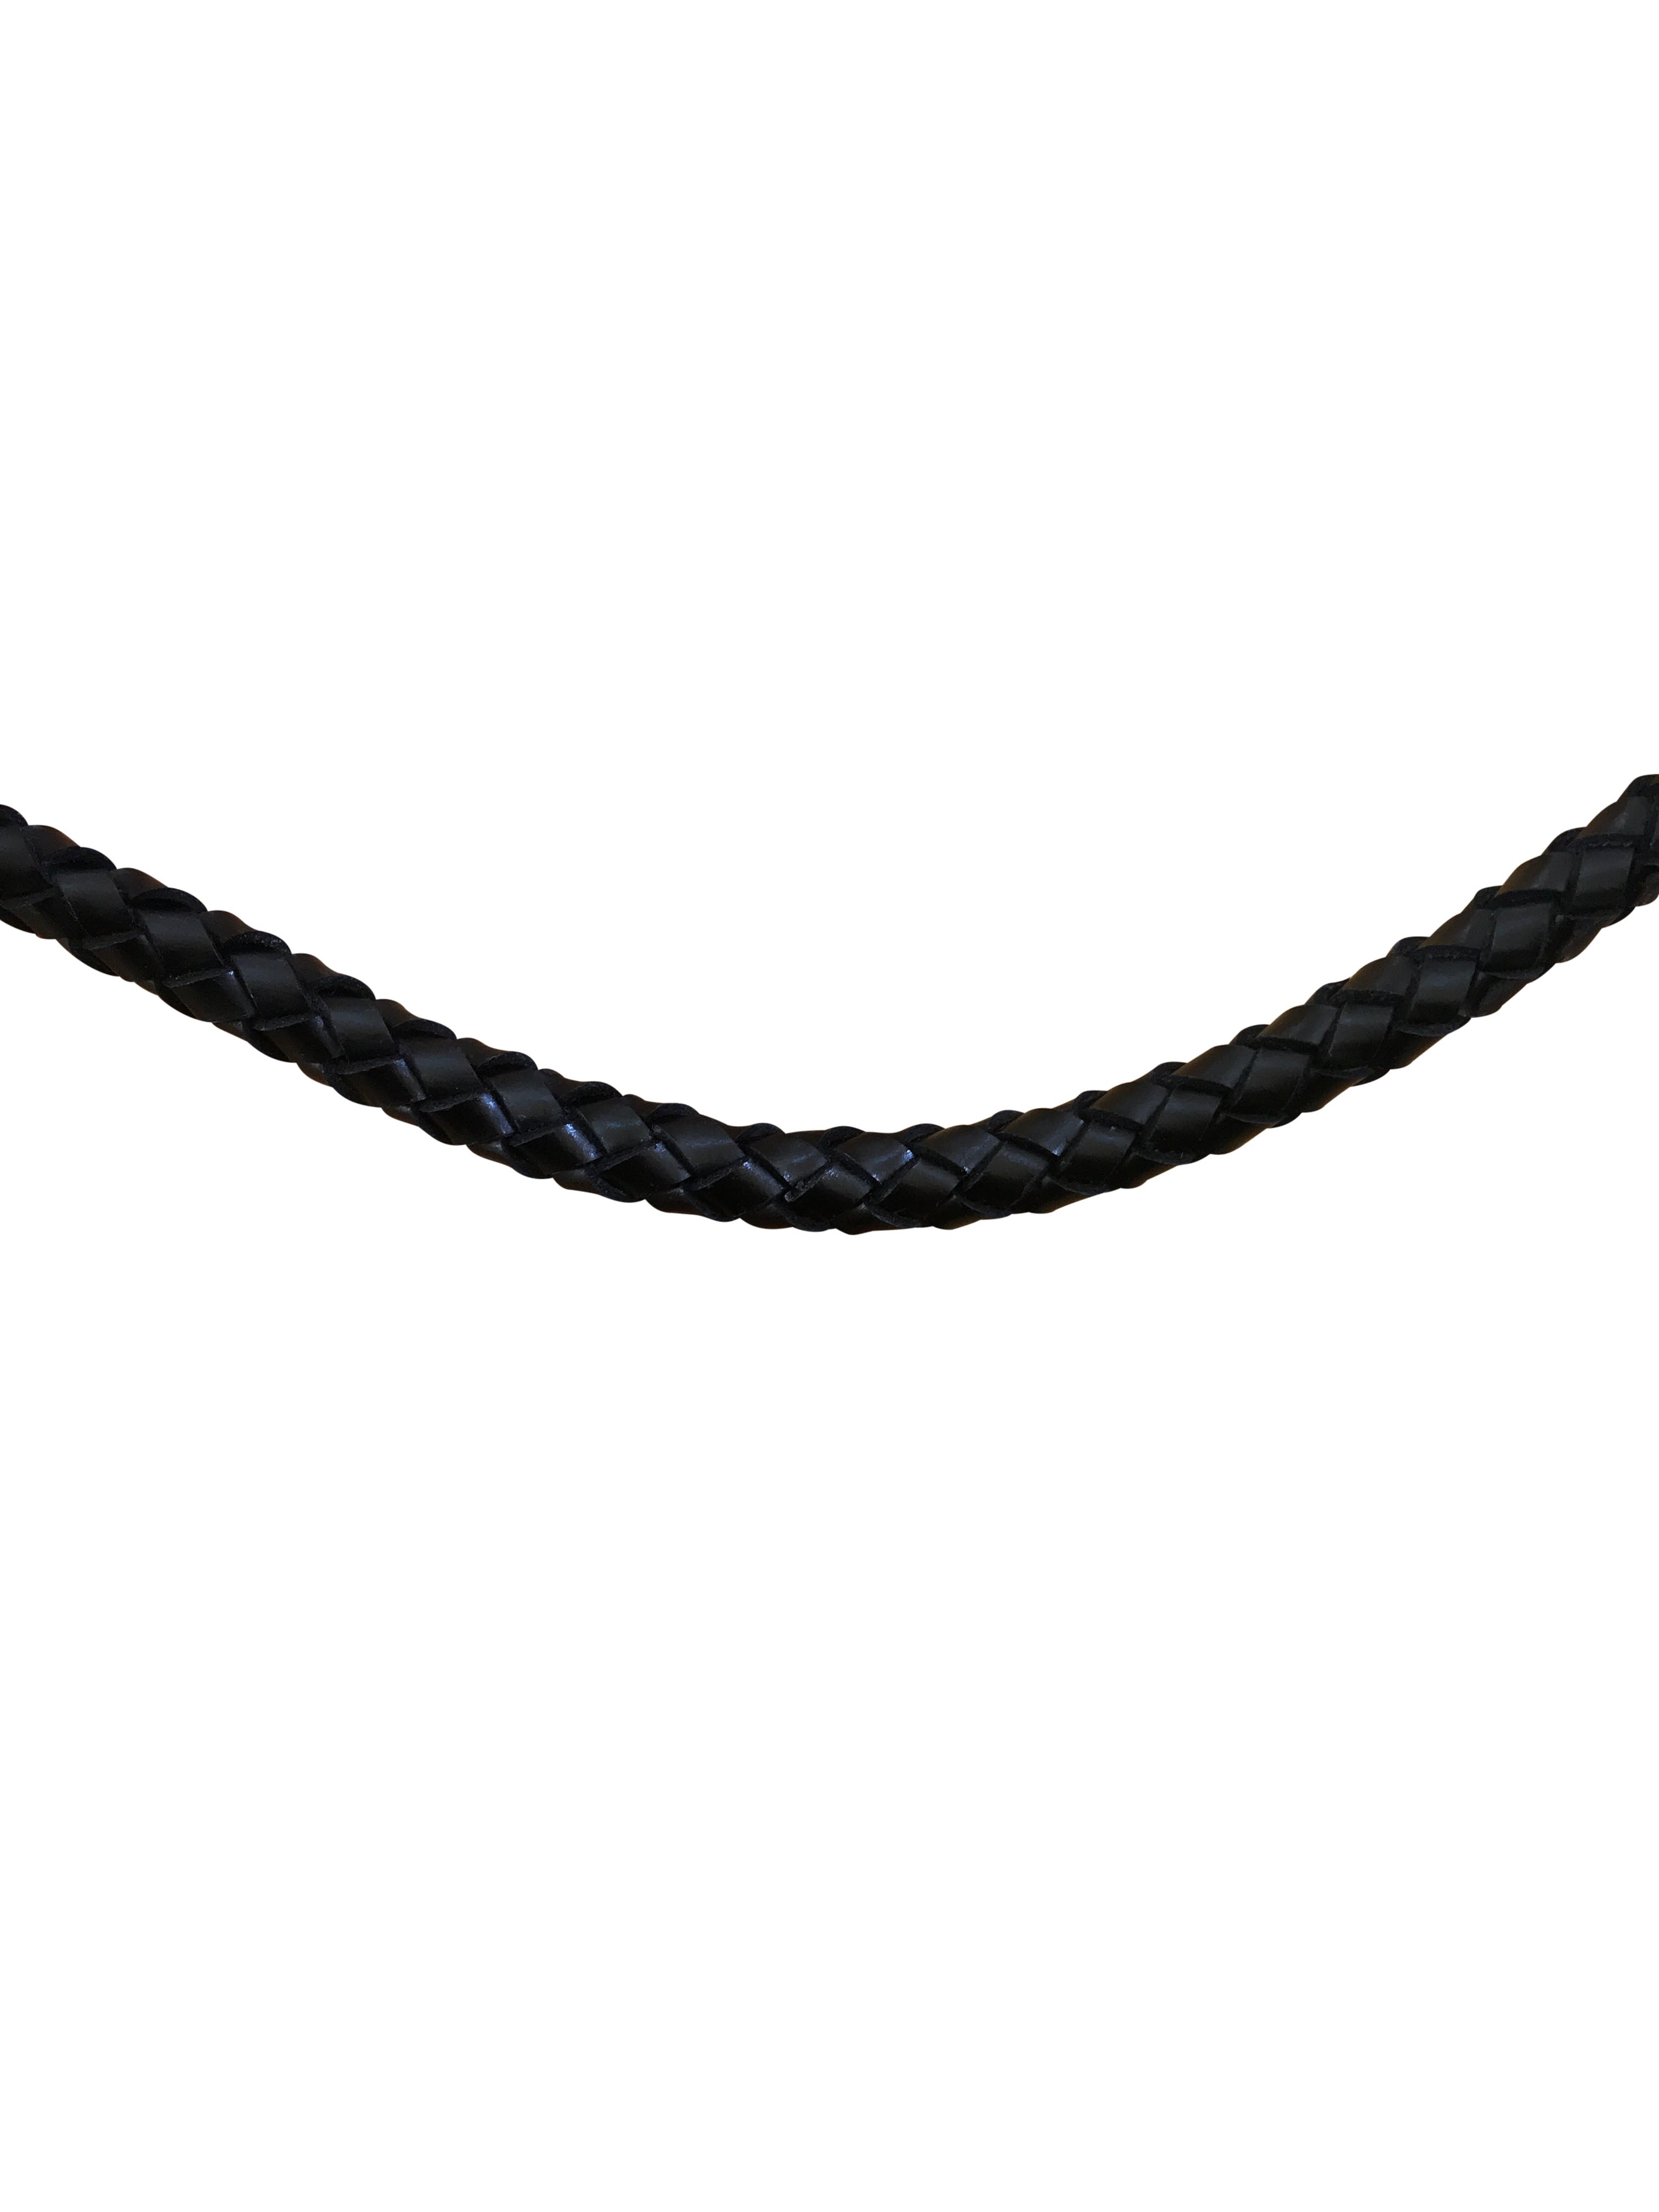 Lumiere - Plaited & Rolled Browband